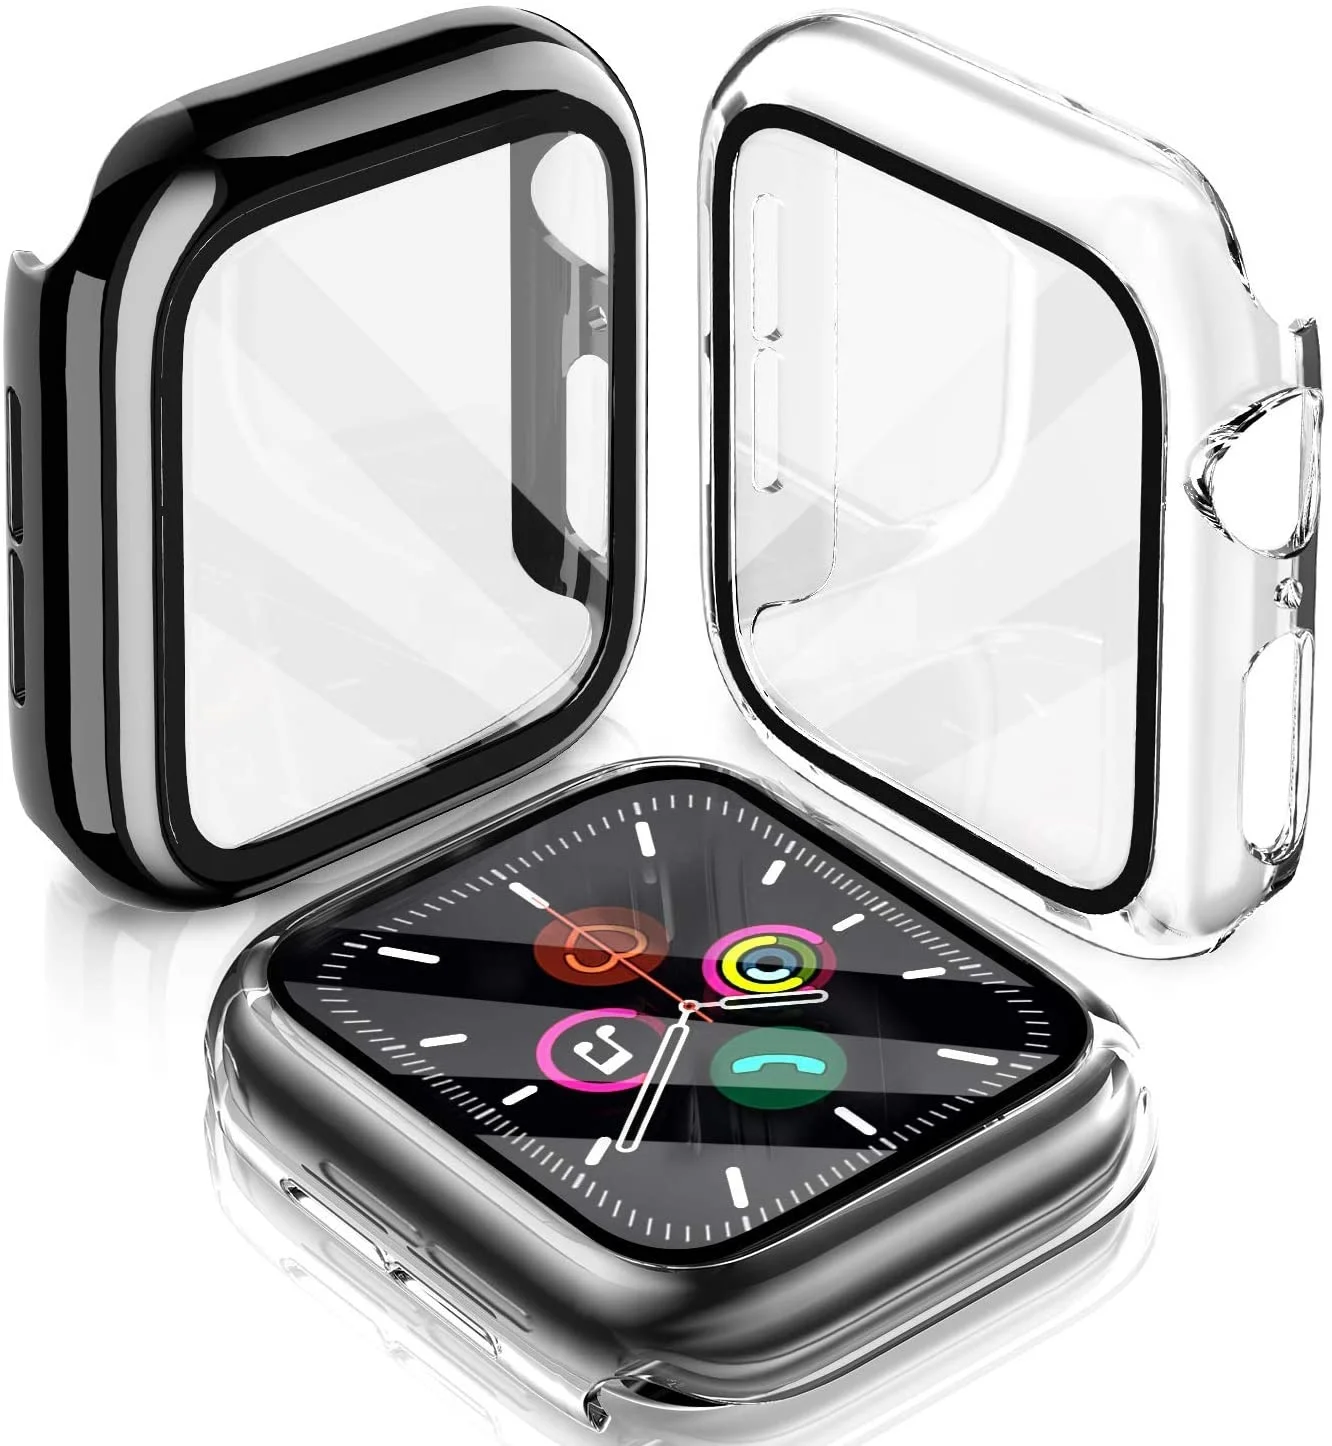 

LeYi 360 full Screen Protector protective Case With Screen Protector For Apple Watch series 1 2 3 4 5 6 7 Cases, Optional